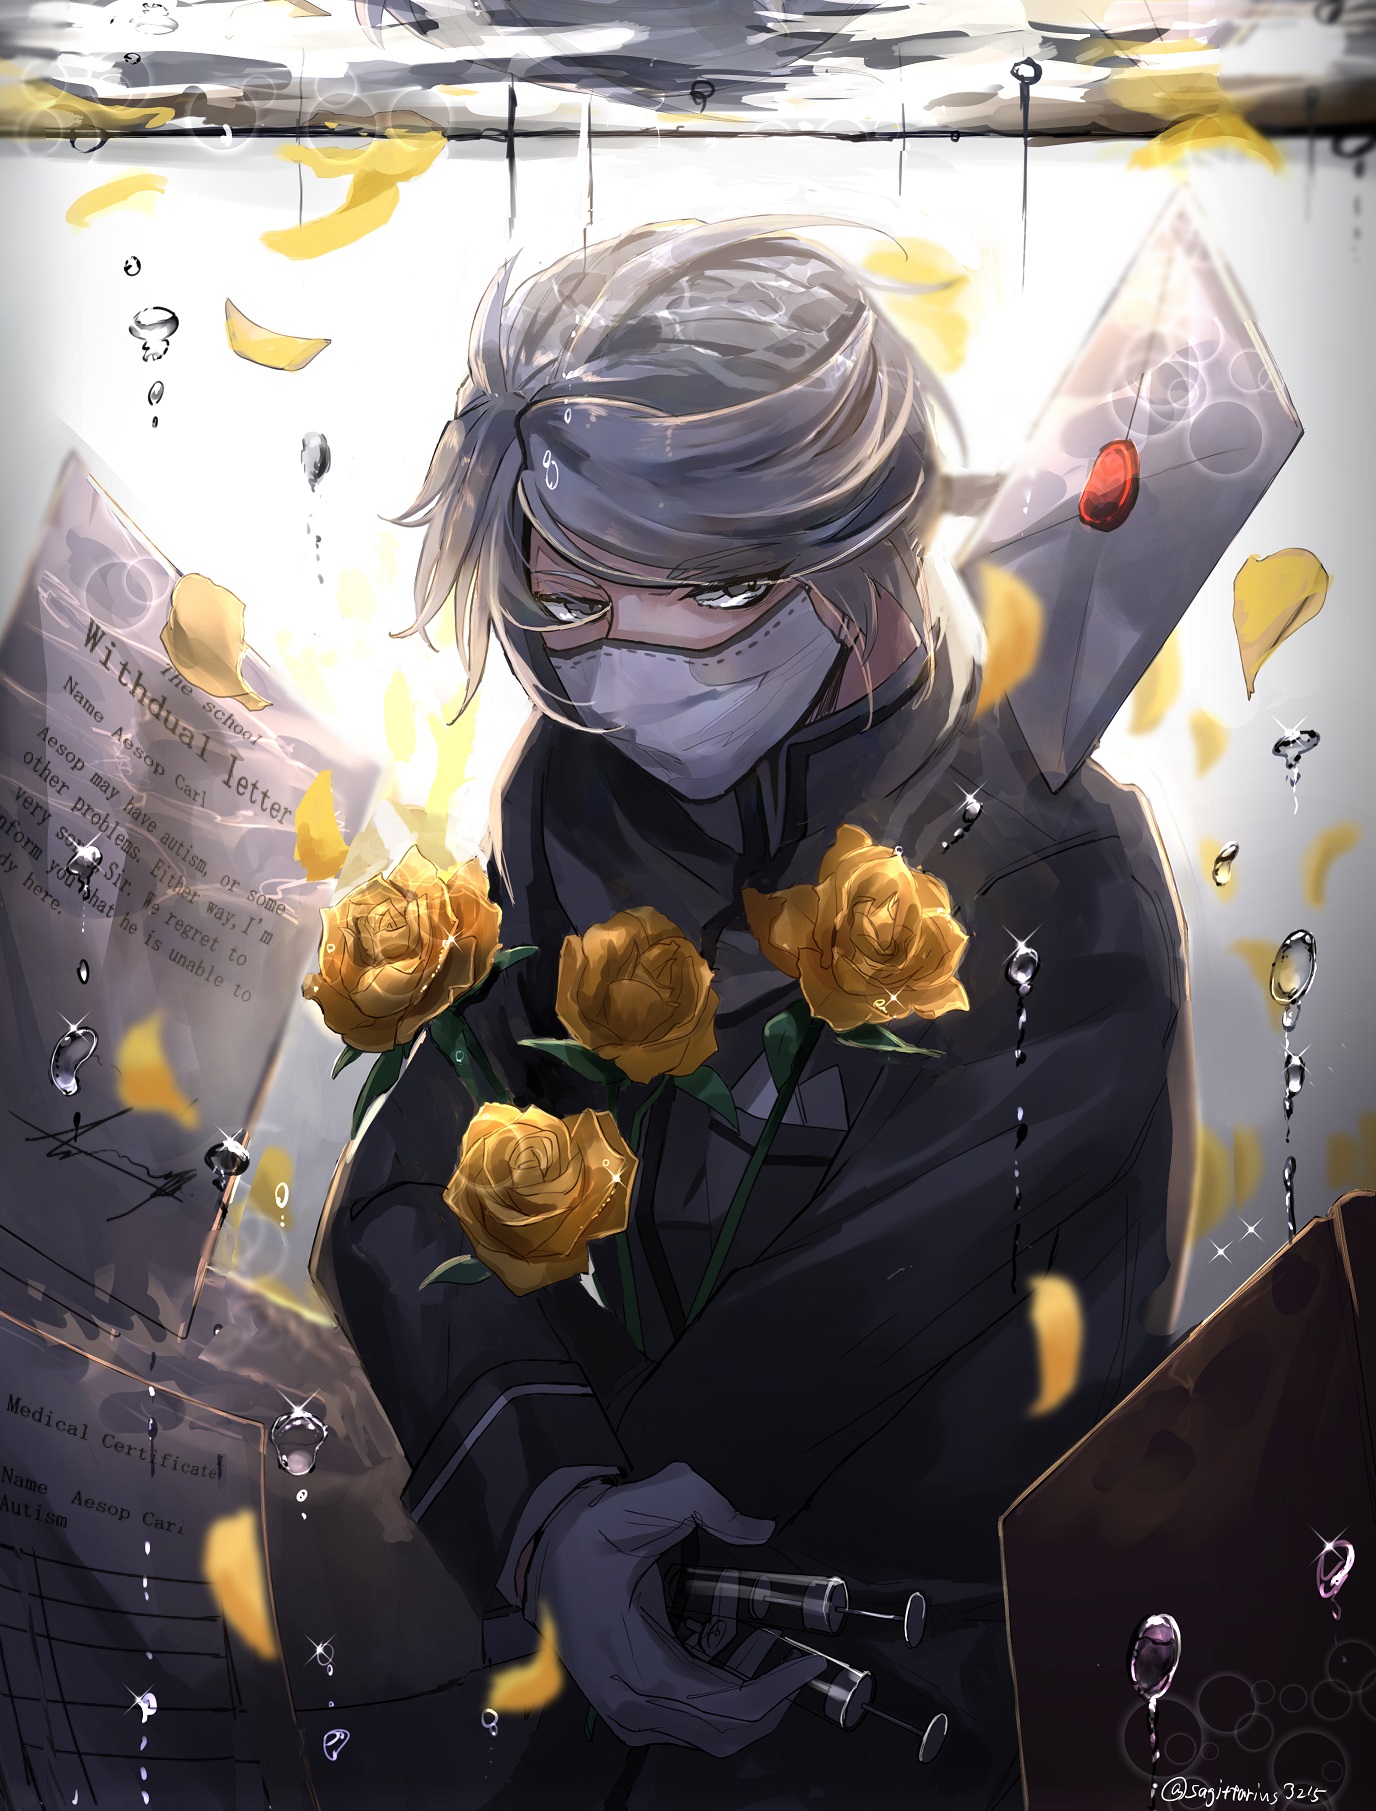 Aesop Carl Anime Yellow Flowers Roses Male Identity V Underwater Bubbles Syringe Letter Hugging Wate 1376x1811